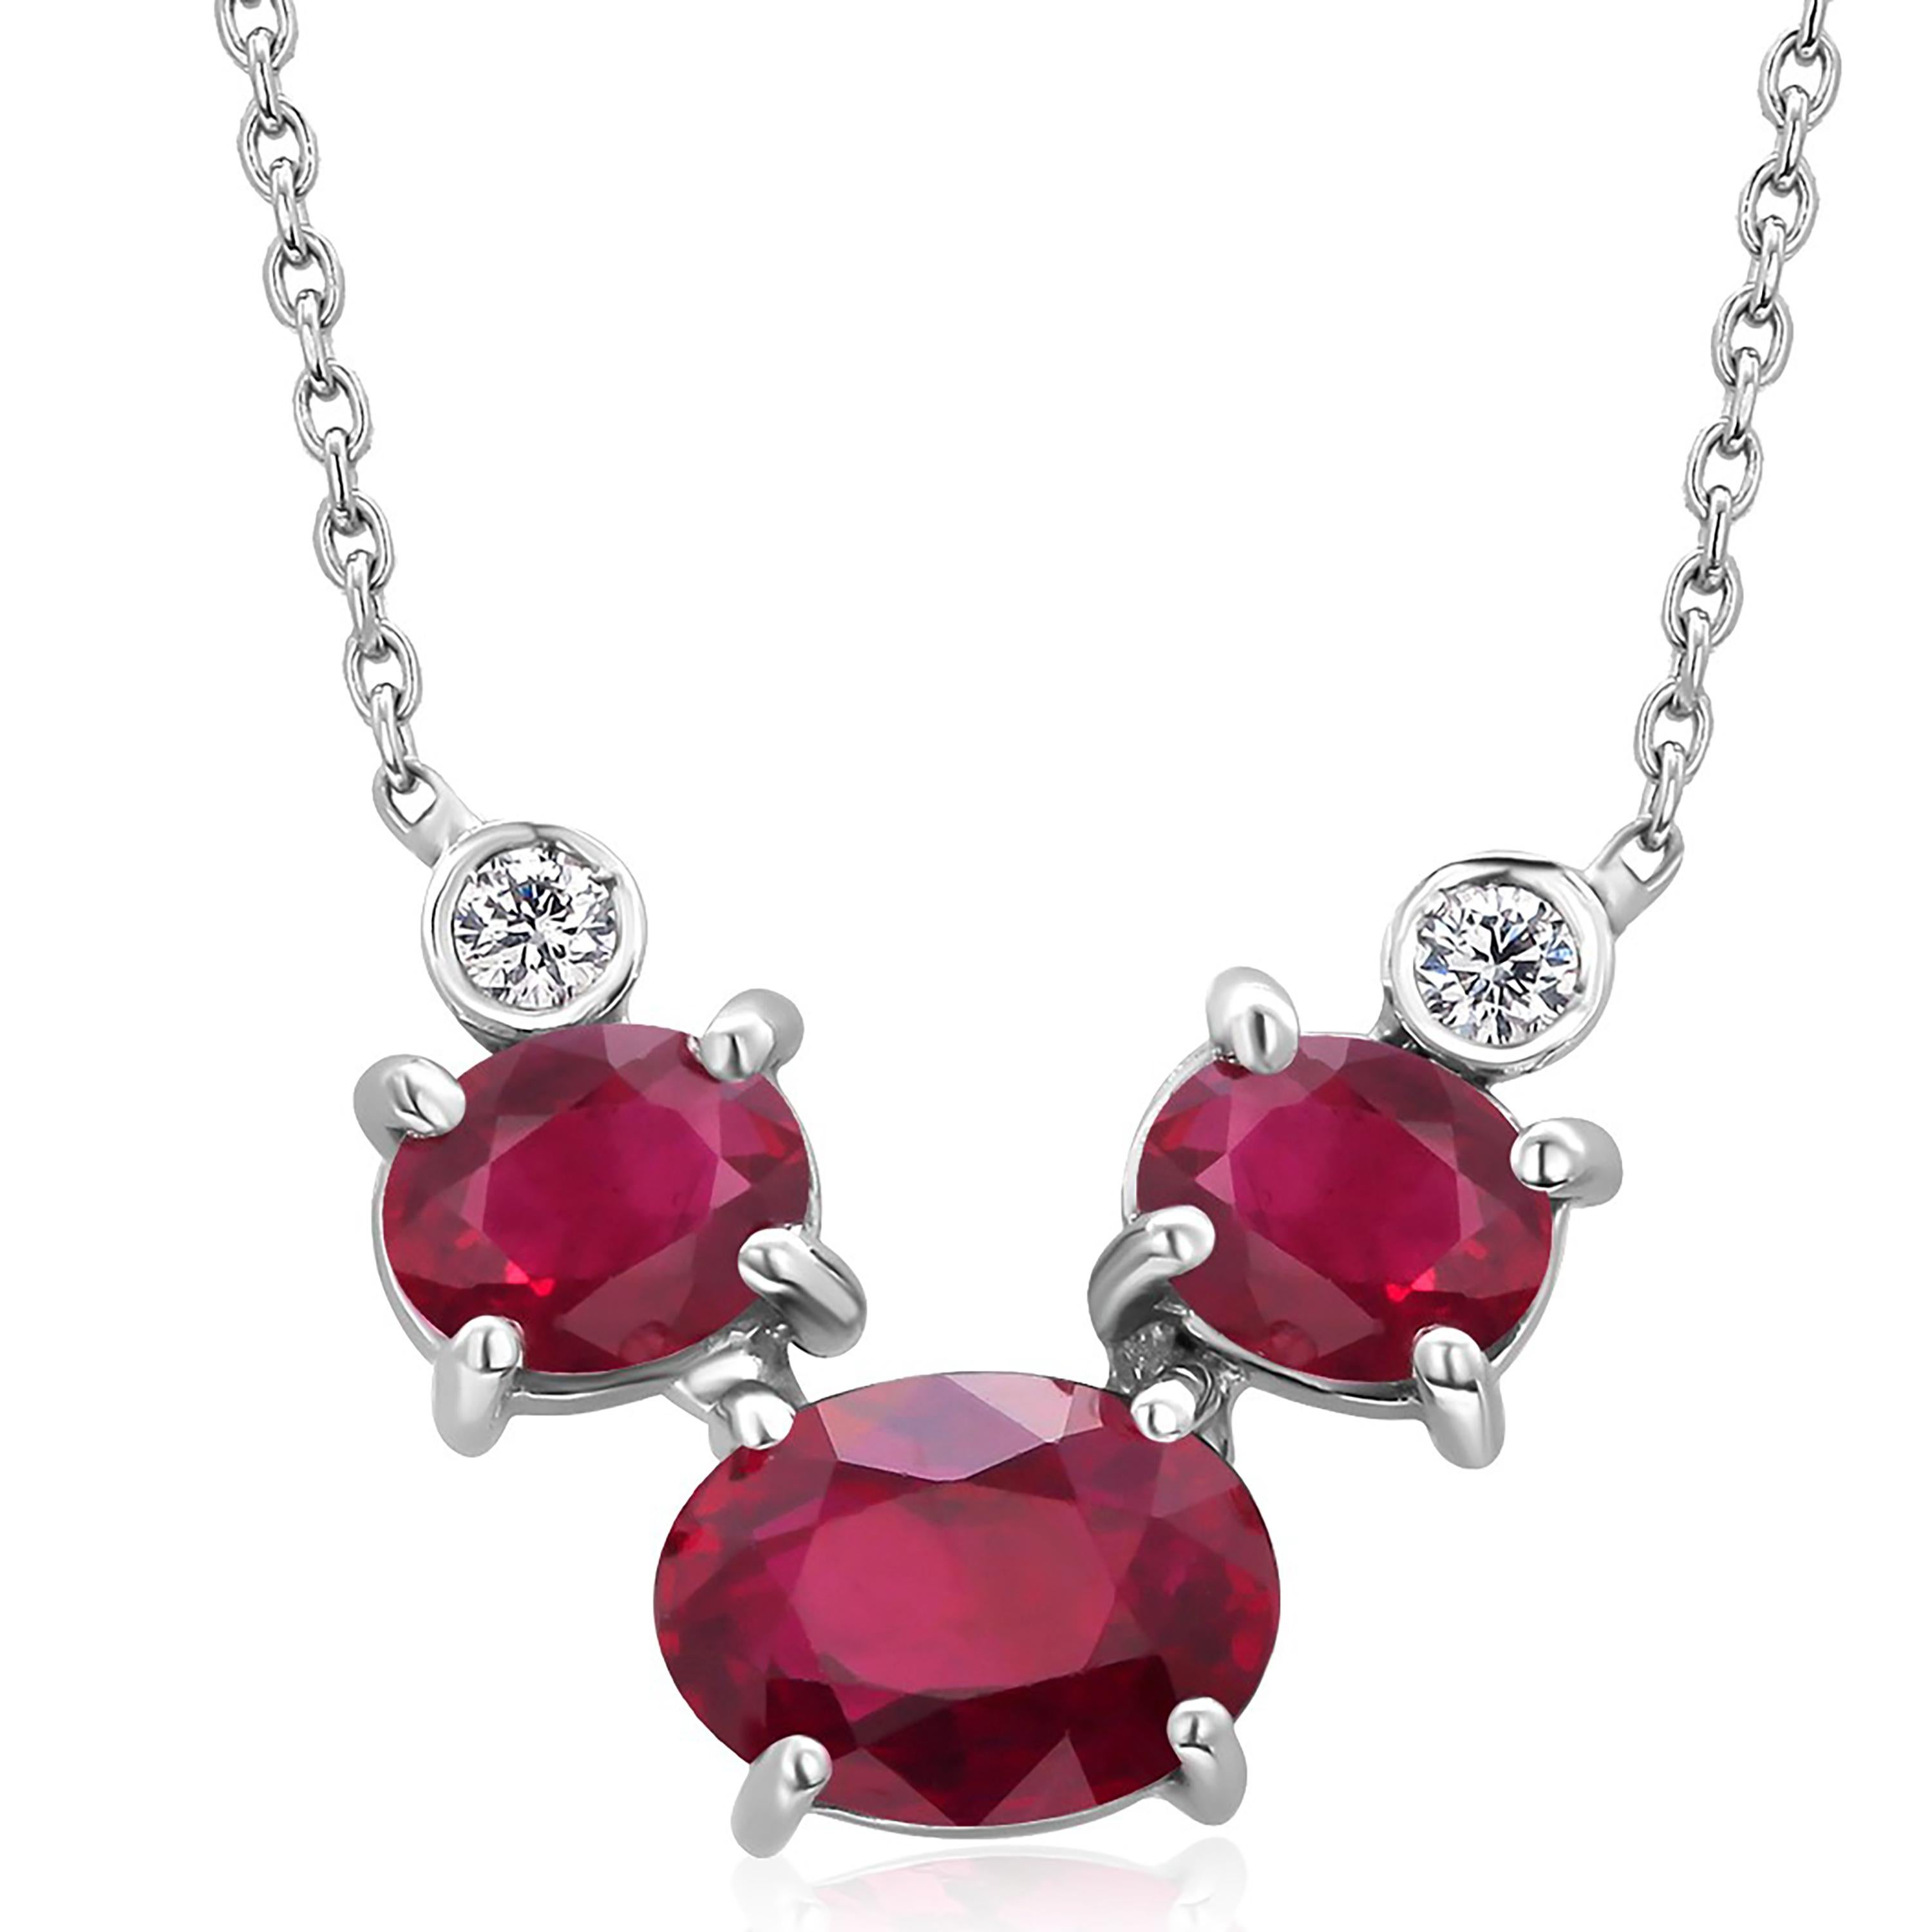 Oval Cut Three Oval Burma Red Rubies and Two Bezel Diamonds Rubies Gold Pendant Necklace